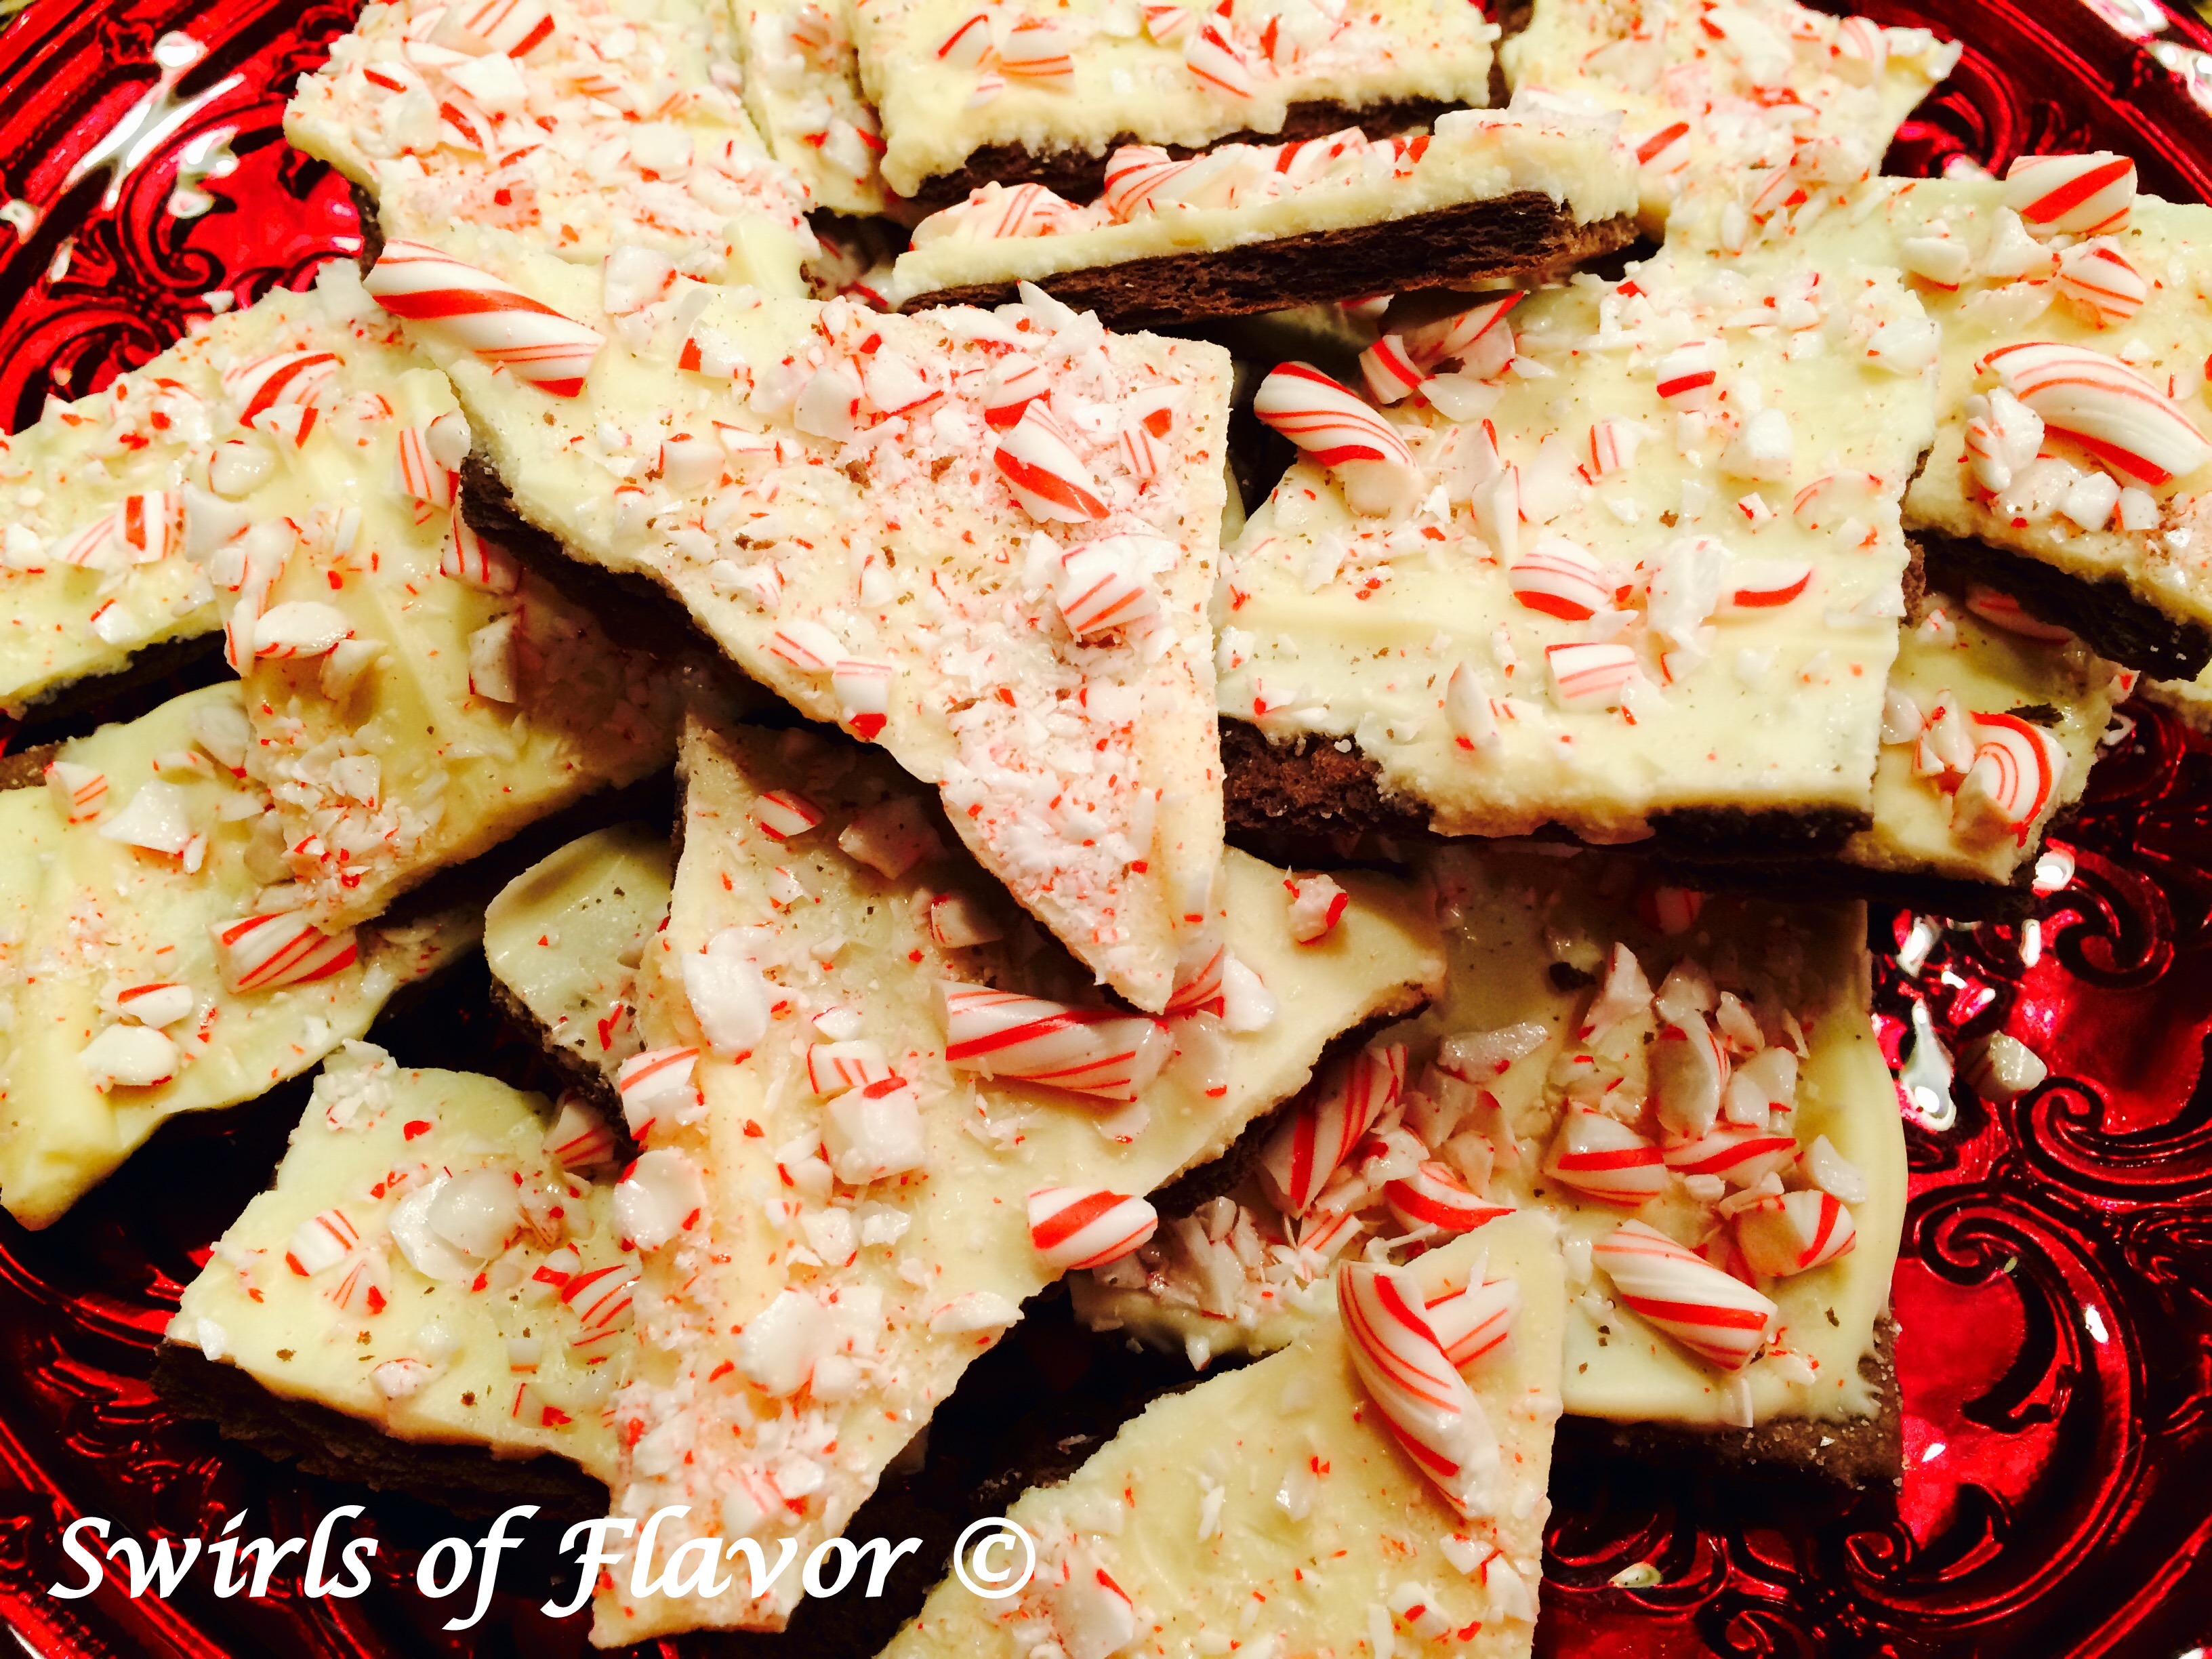 No-Bake Peppermint Bark Cookies....a twist on a holiday favorite! White chocolate surrounded by peppermint candy and chocolate cookies are guaranteed to be a hit on your holiday table! And so easy to make as a last minute sweet treat! #peppermint #peppermintbark #holiday #Christmas #cookies #nobake #dessert #candycane #whitechocolate #chocolategrahamcrackers #swirlsofflavor